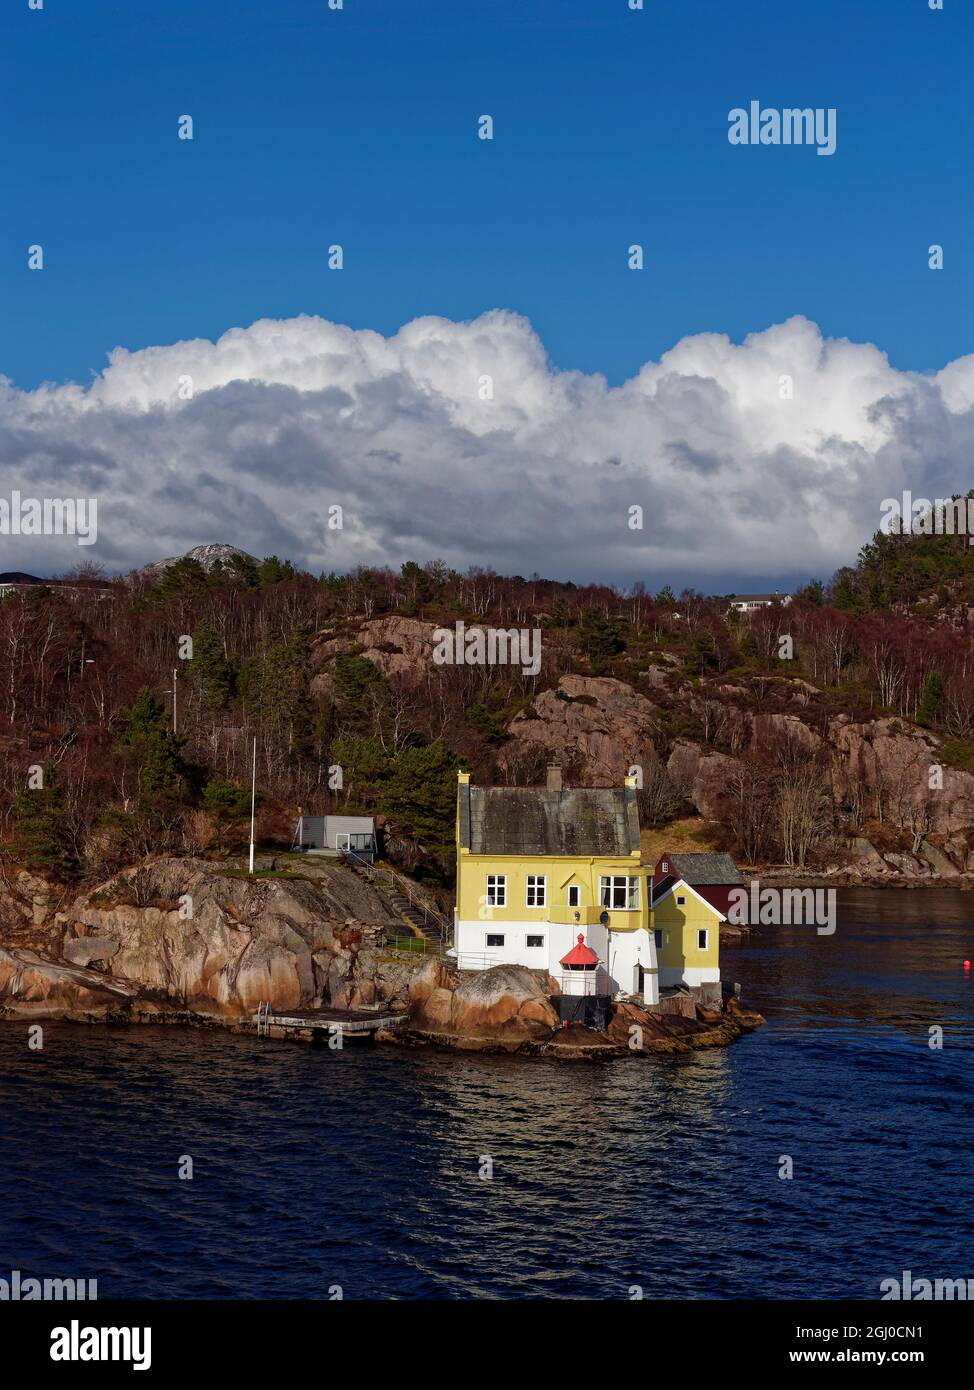 A Traditional wooden Norwegian House set close to the Waters edge next to a Navigational Marker and Light, close to the Port of Bergen. Stock Photo